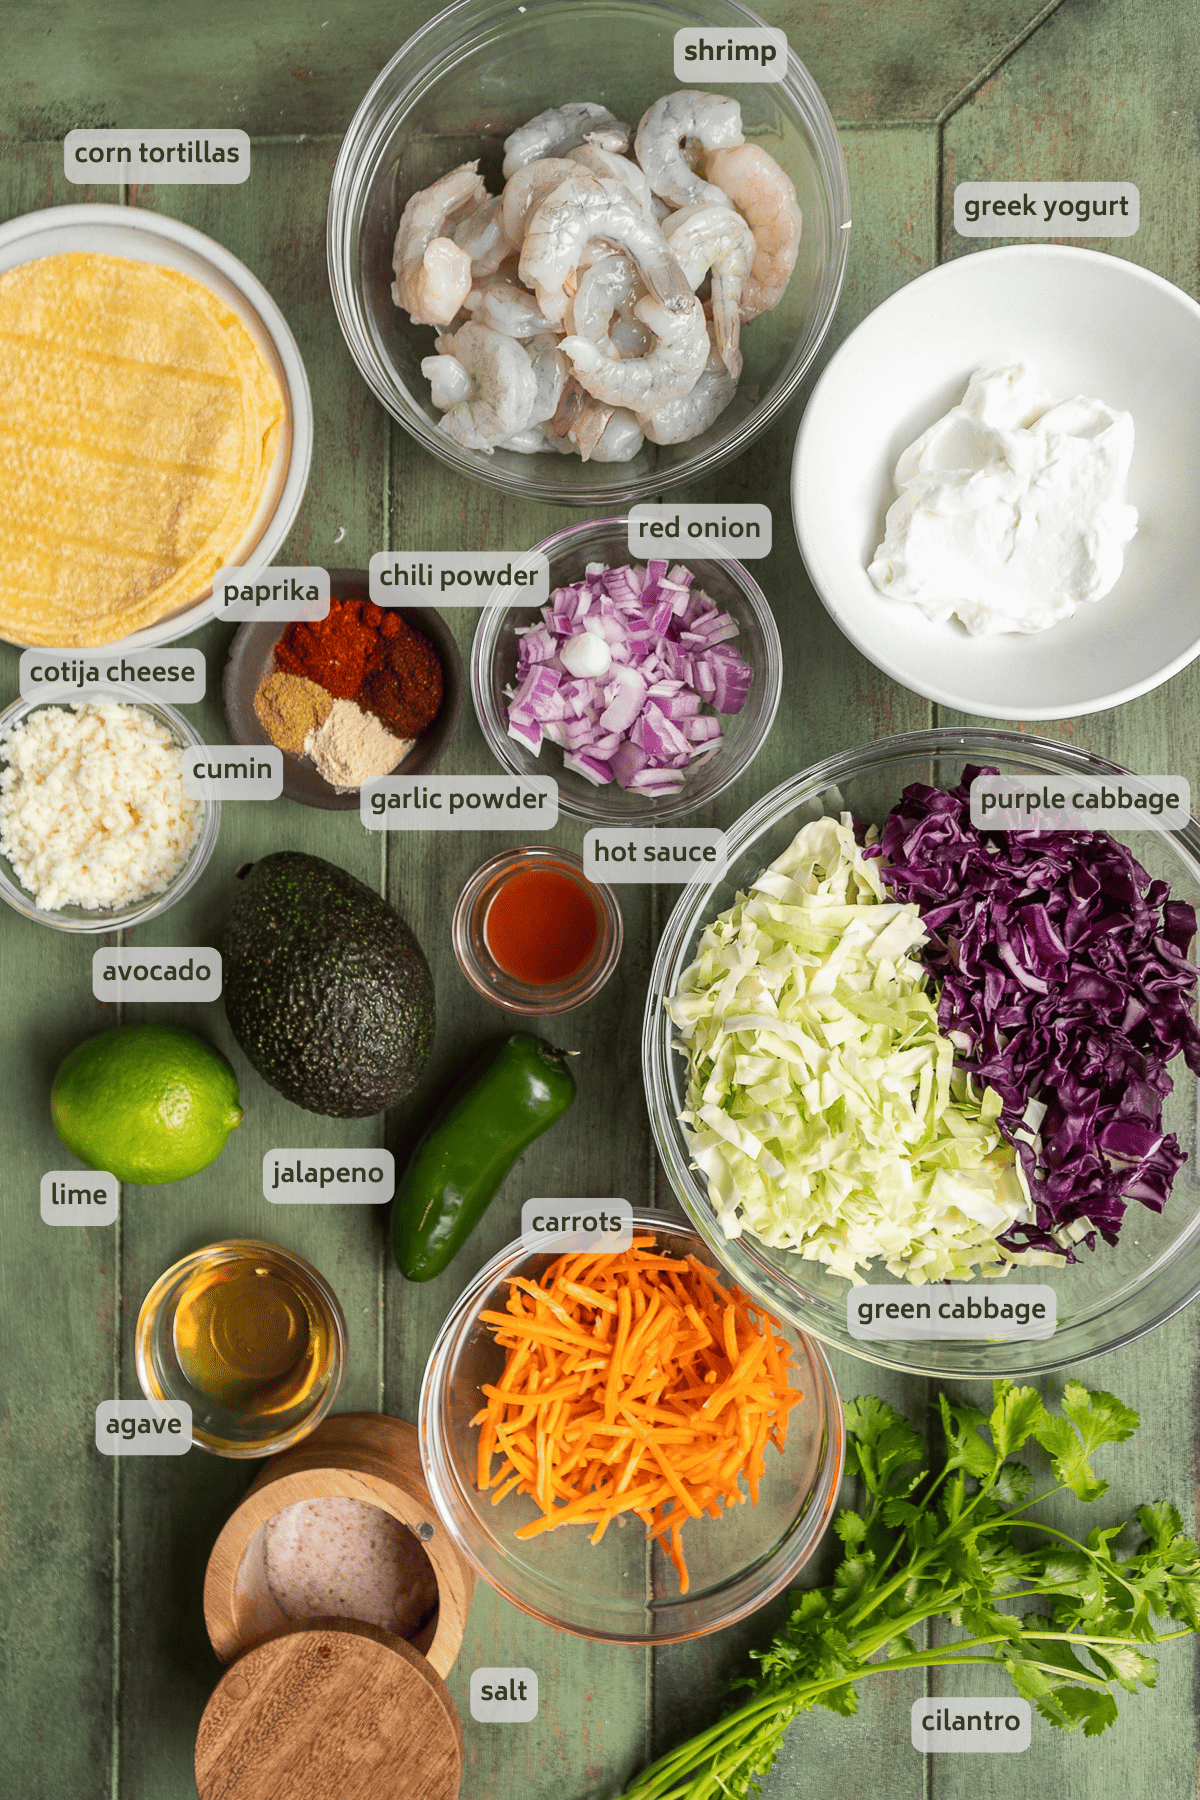 Baja shrimp taco ingredients on a green surface.